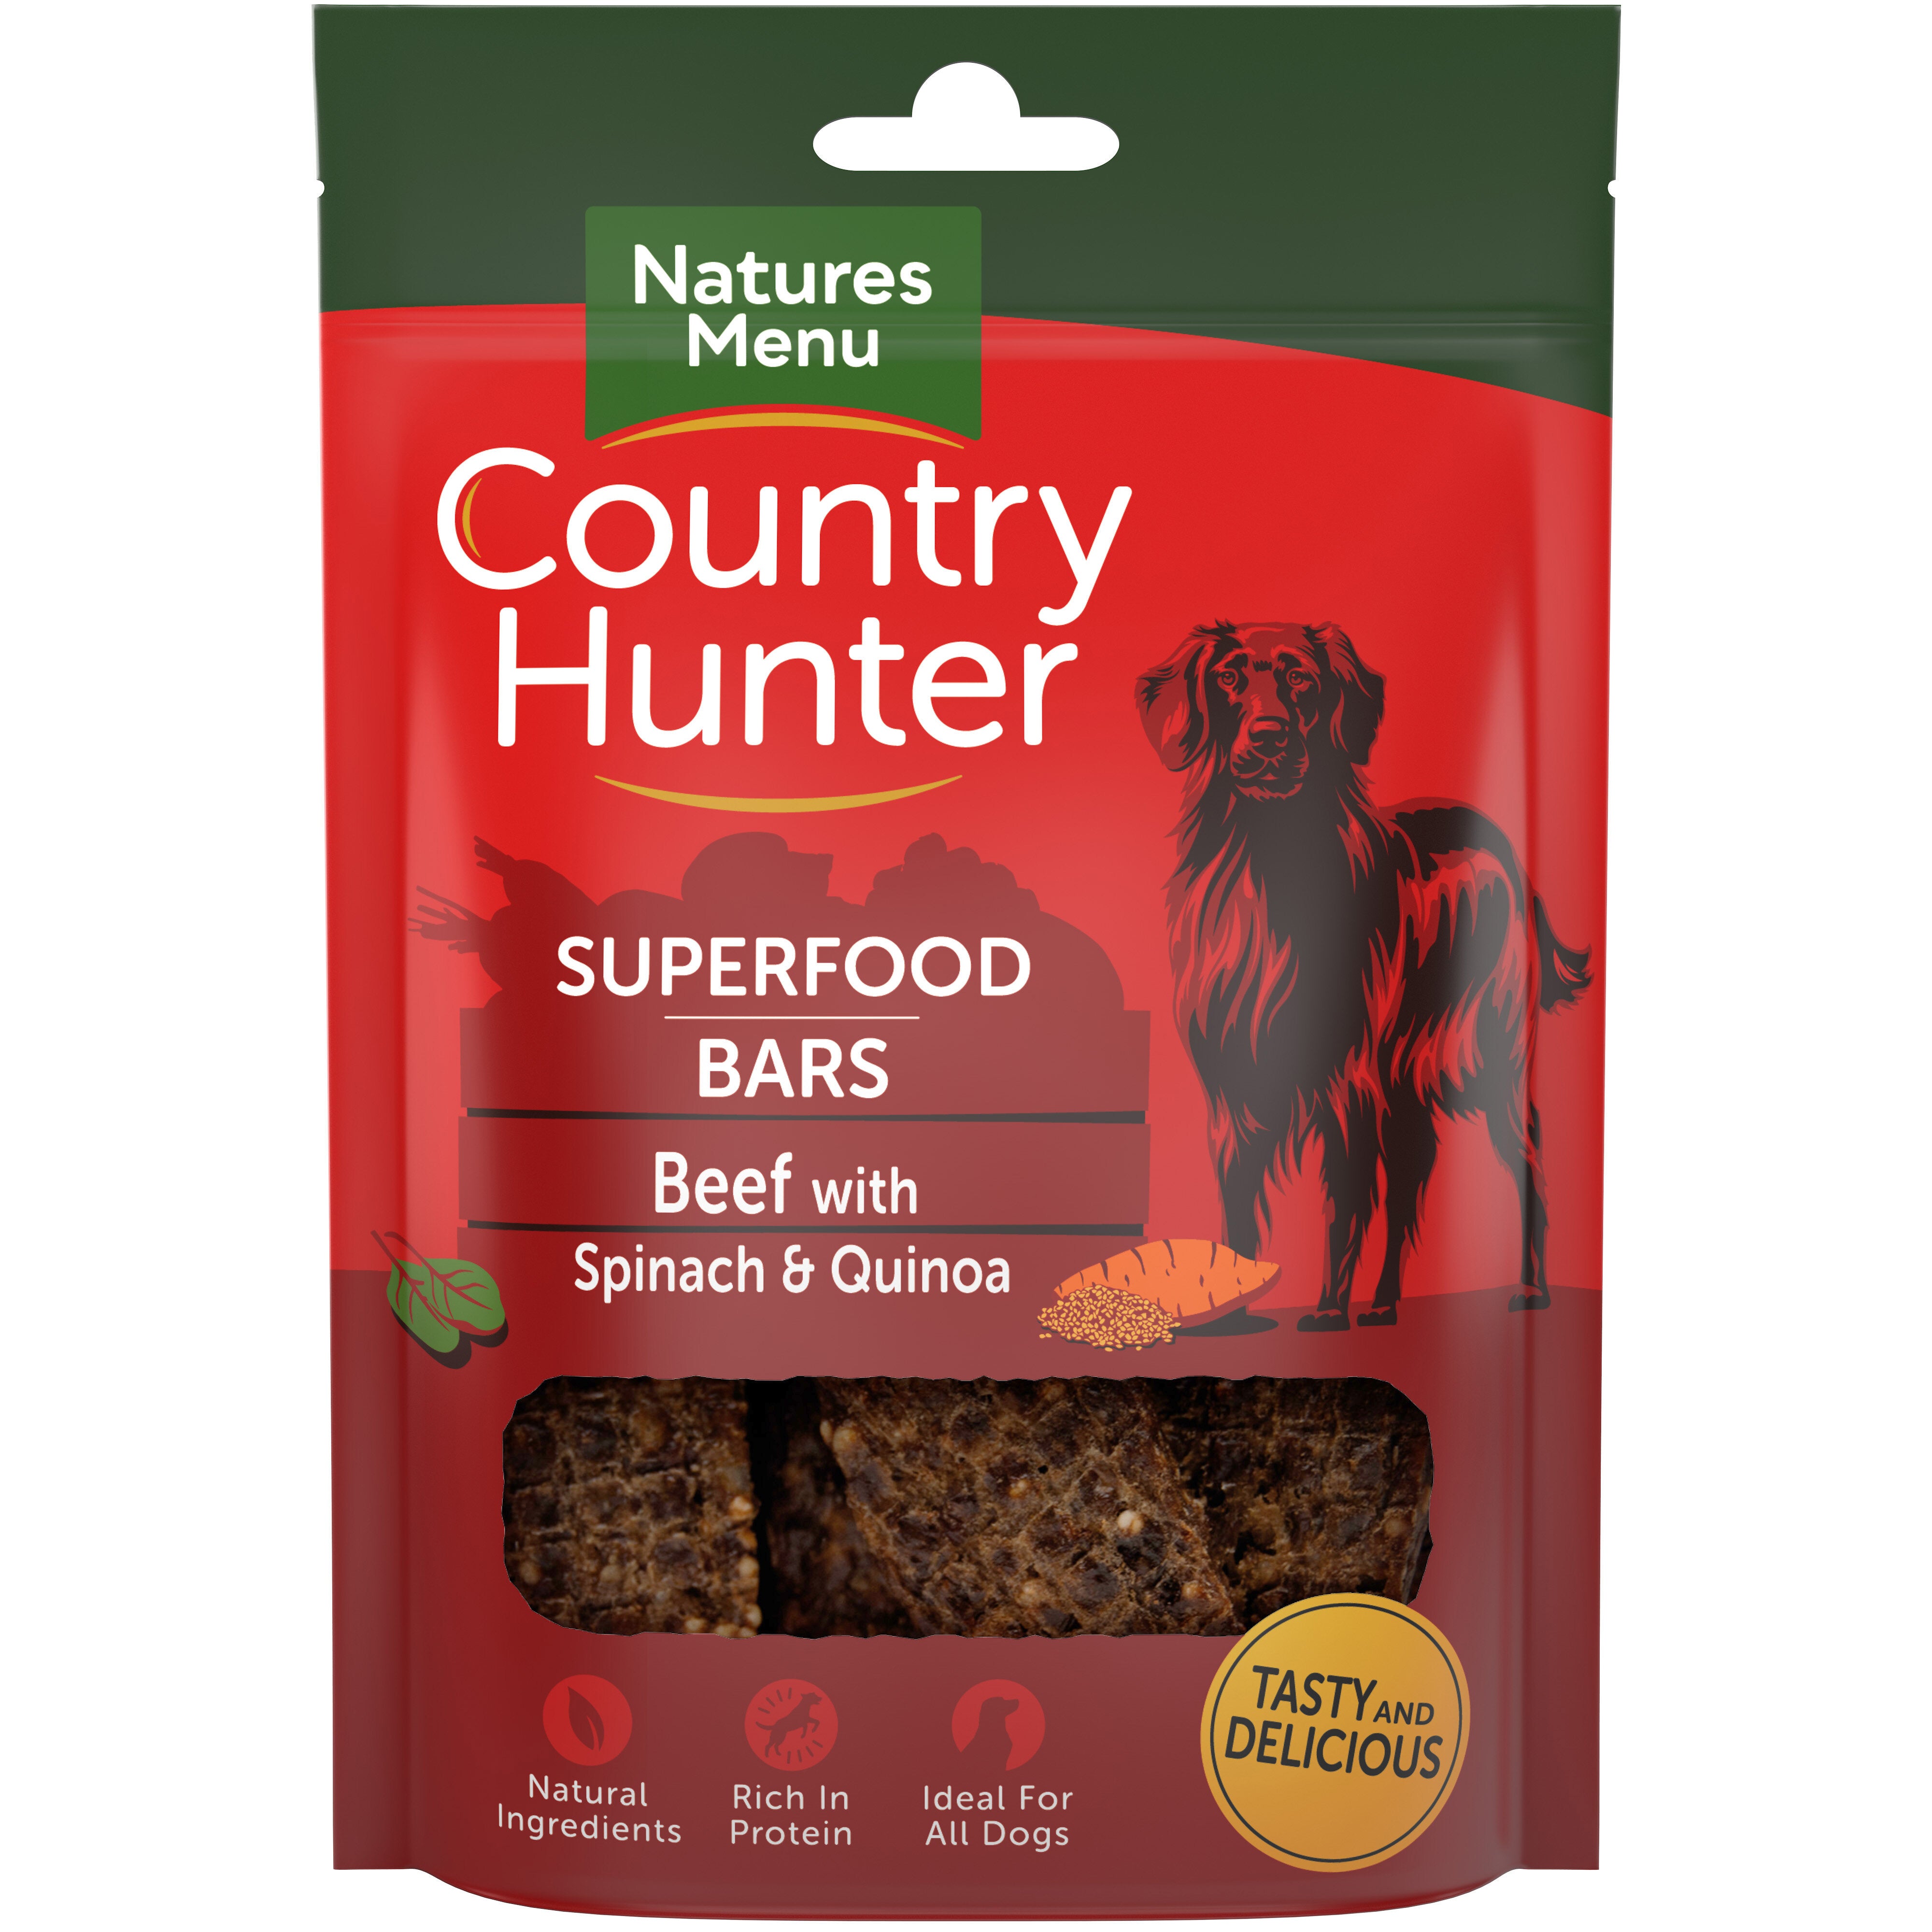 Natures Menu Country Hunter Superfoods Bar Beef, Spinach and Quinoa 100g